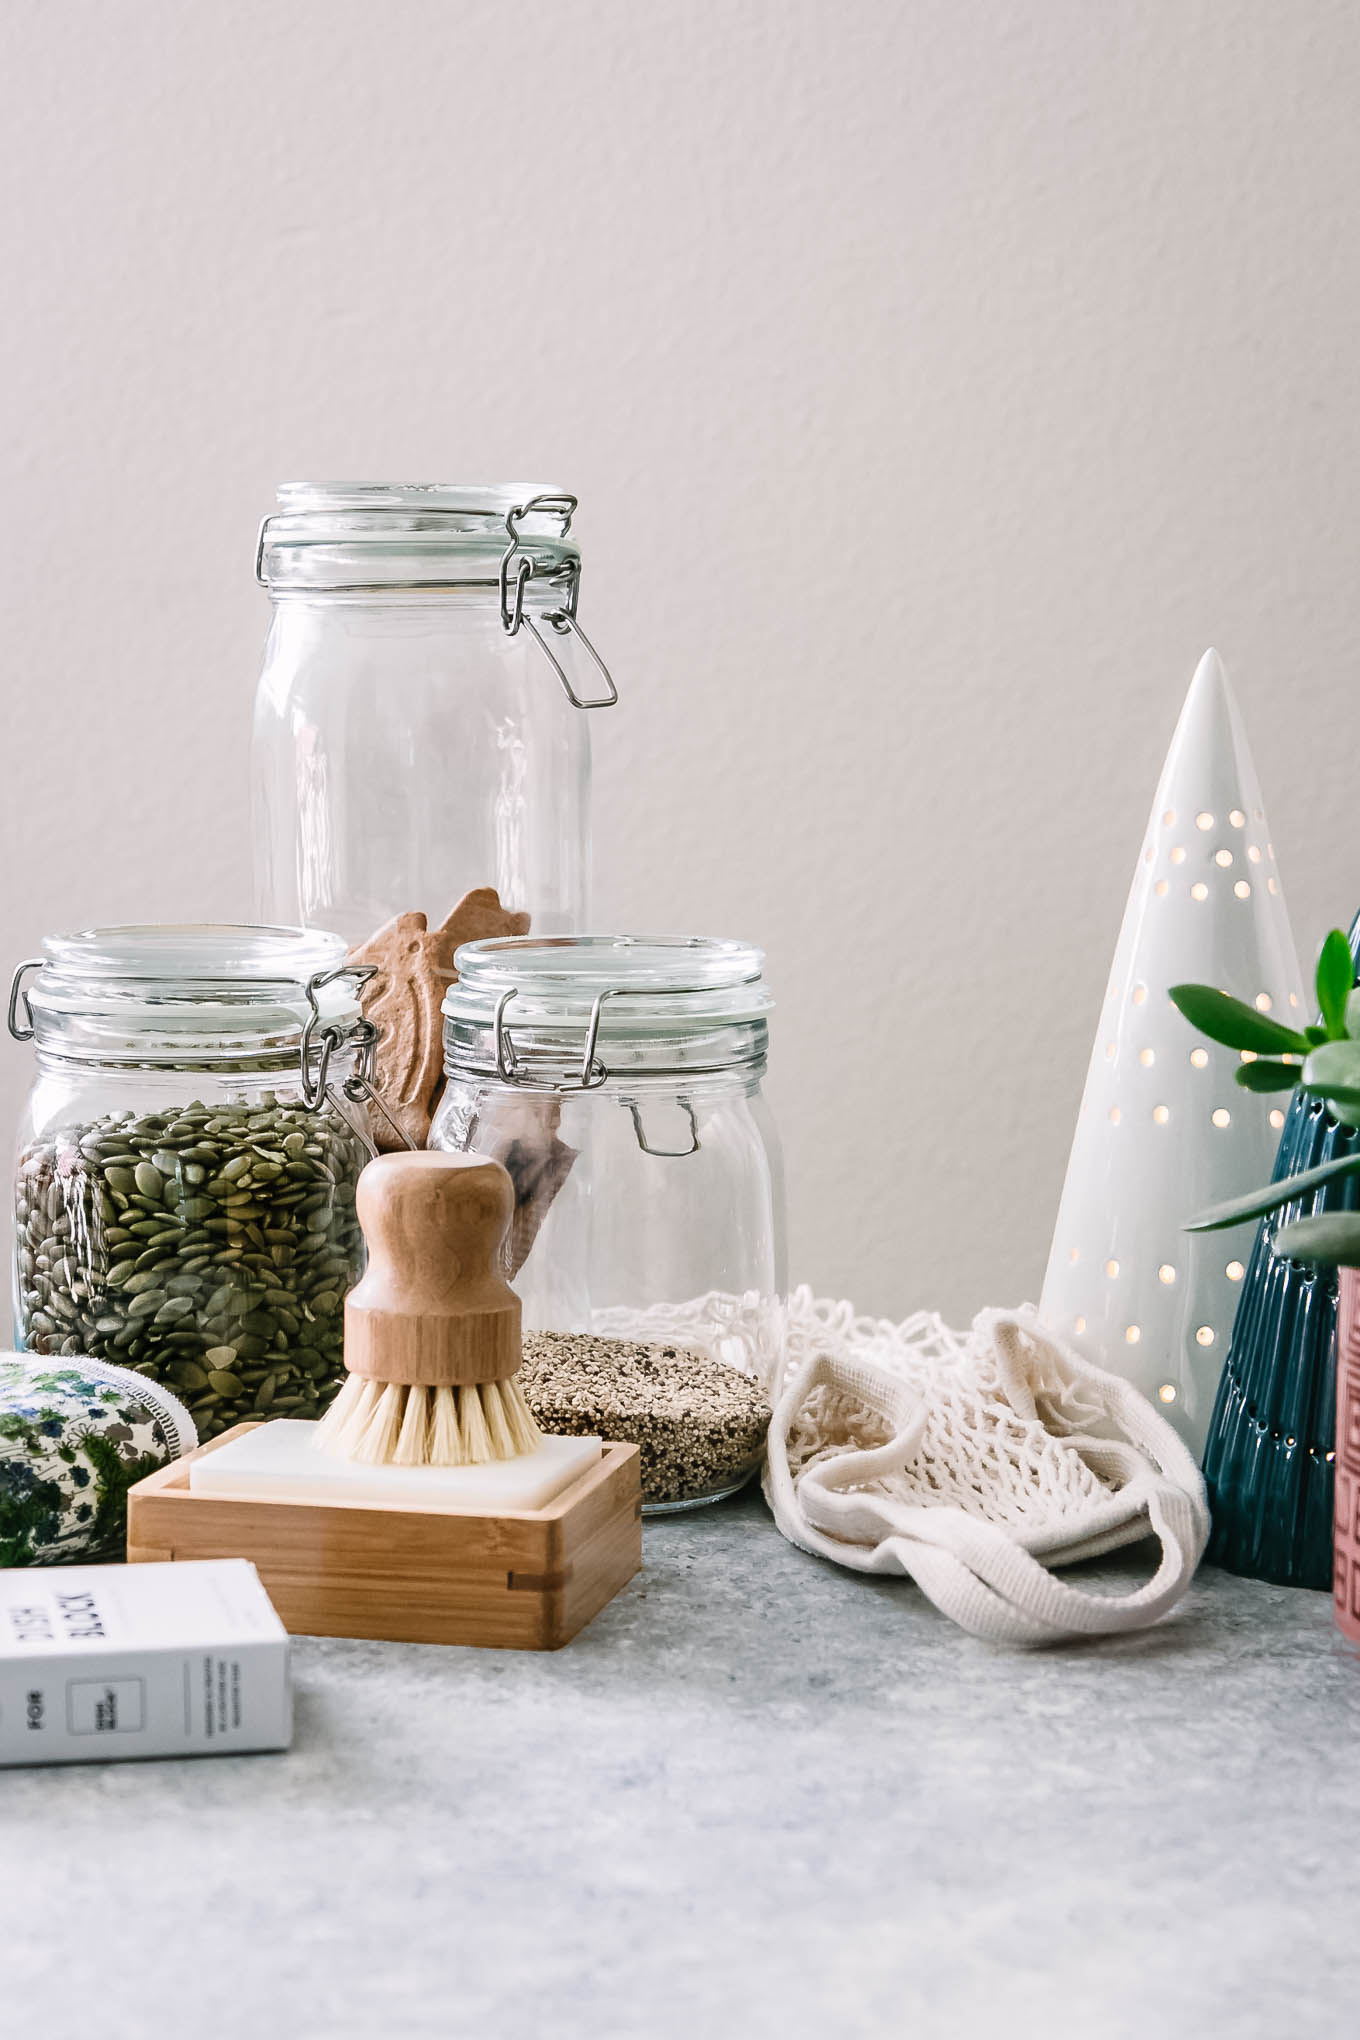 17 Zero Waste Gift Ideas for the Holidays